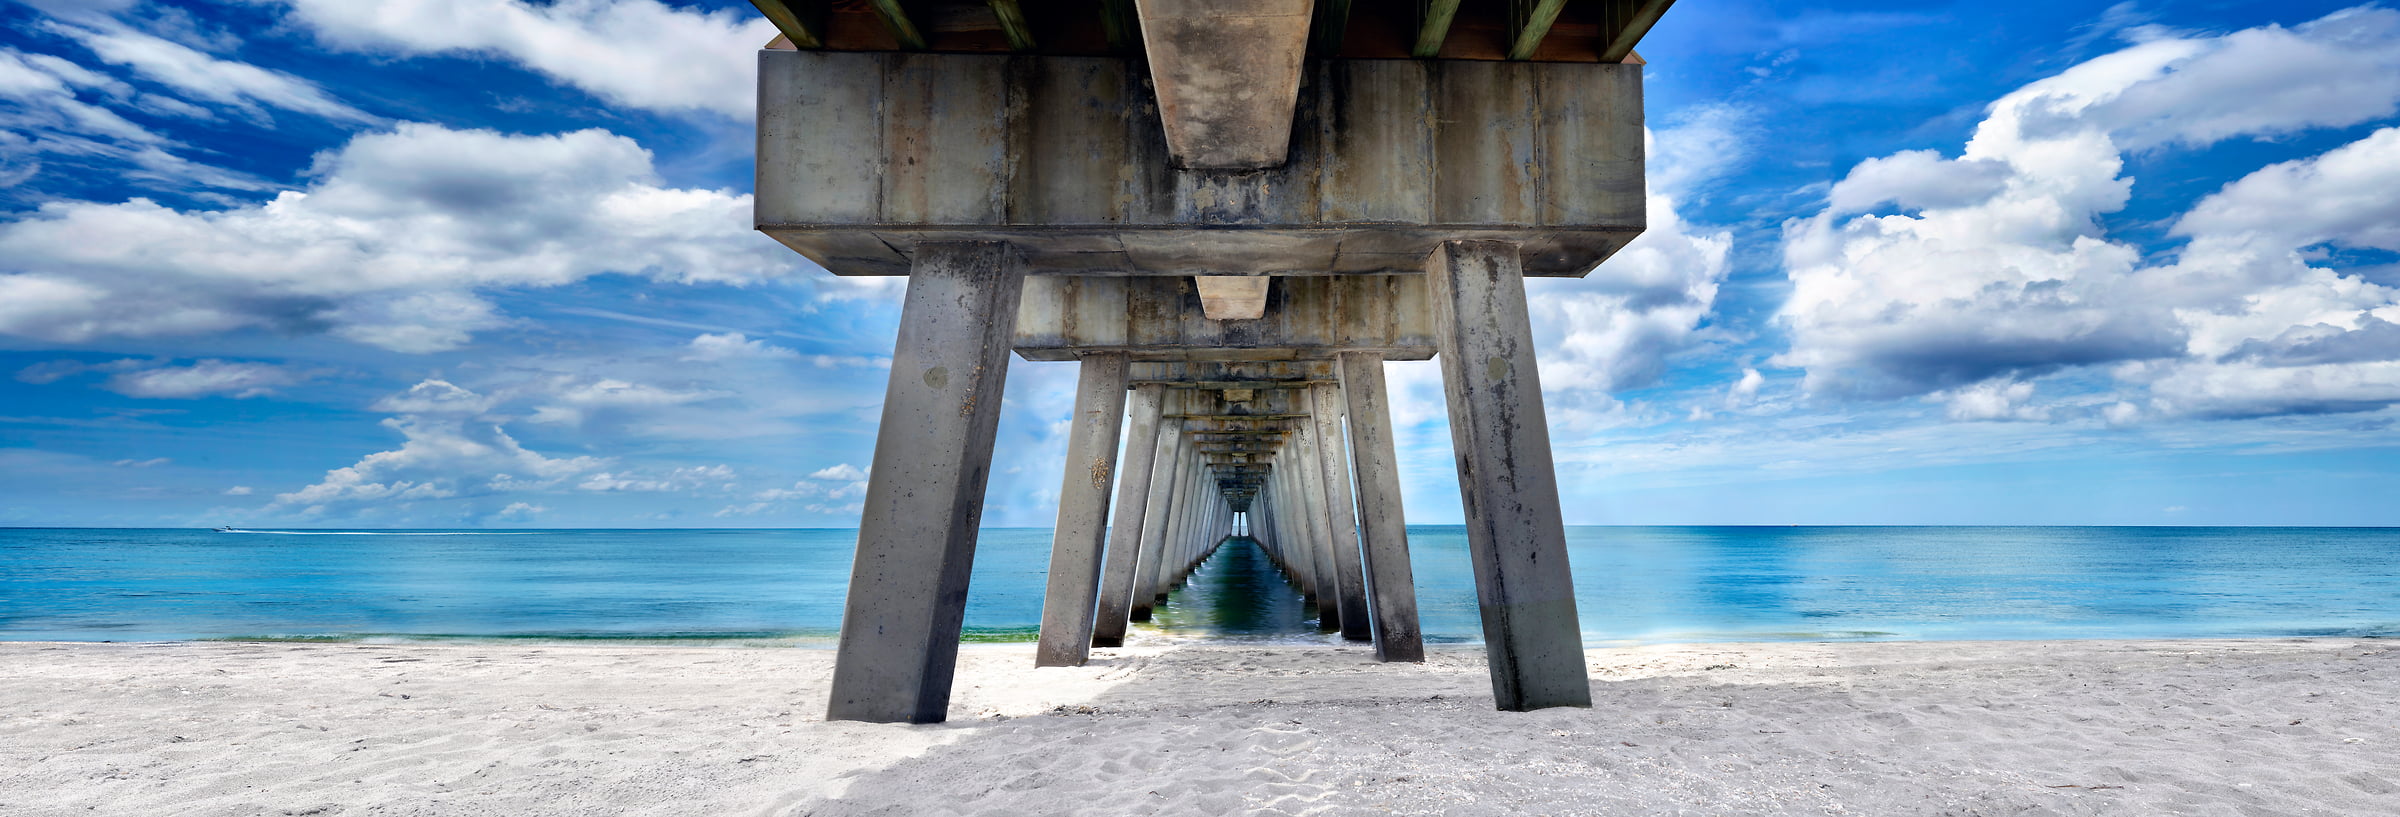 306 megapixels! A very high resolution, large-format VAST photo print of a beach scene under a pier with the ocean and sand; photograph created by Phil Crawshay in Venice Pier, Venice, Florida